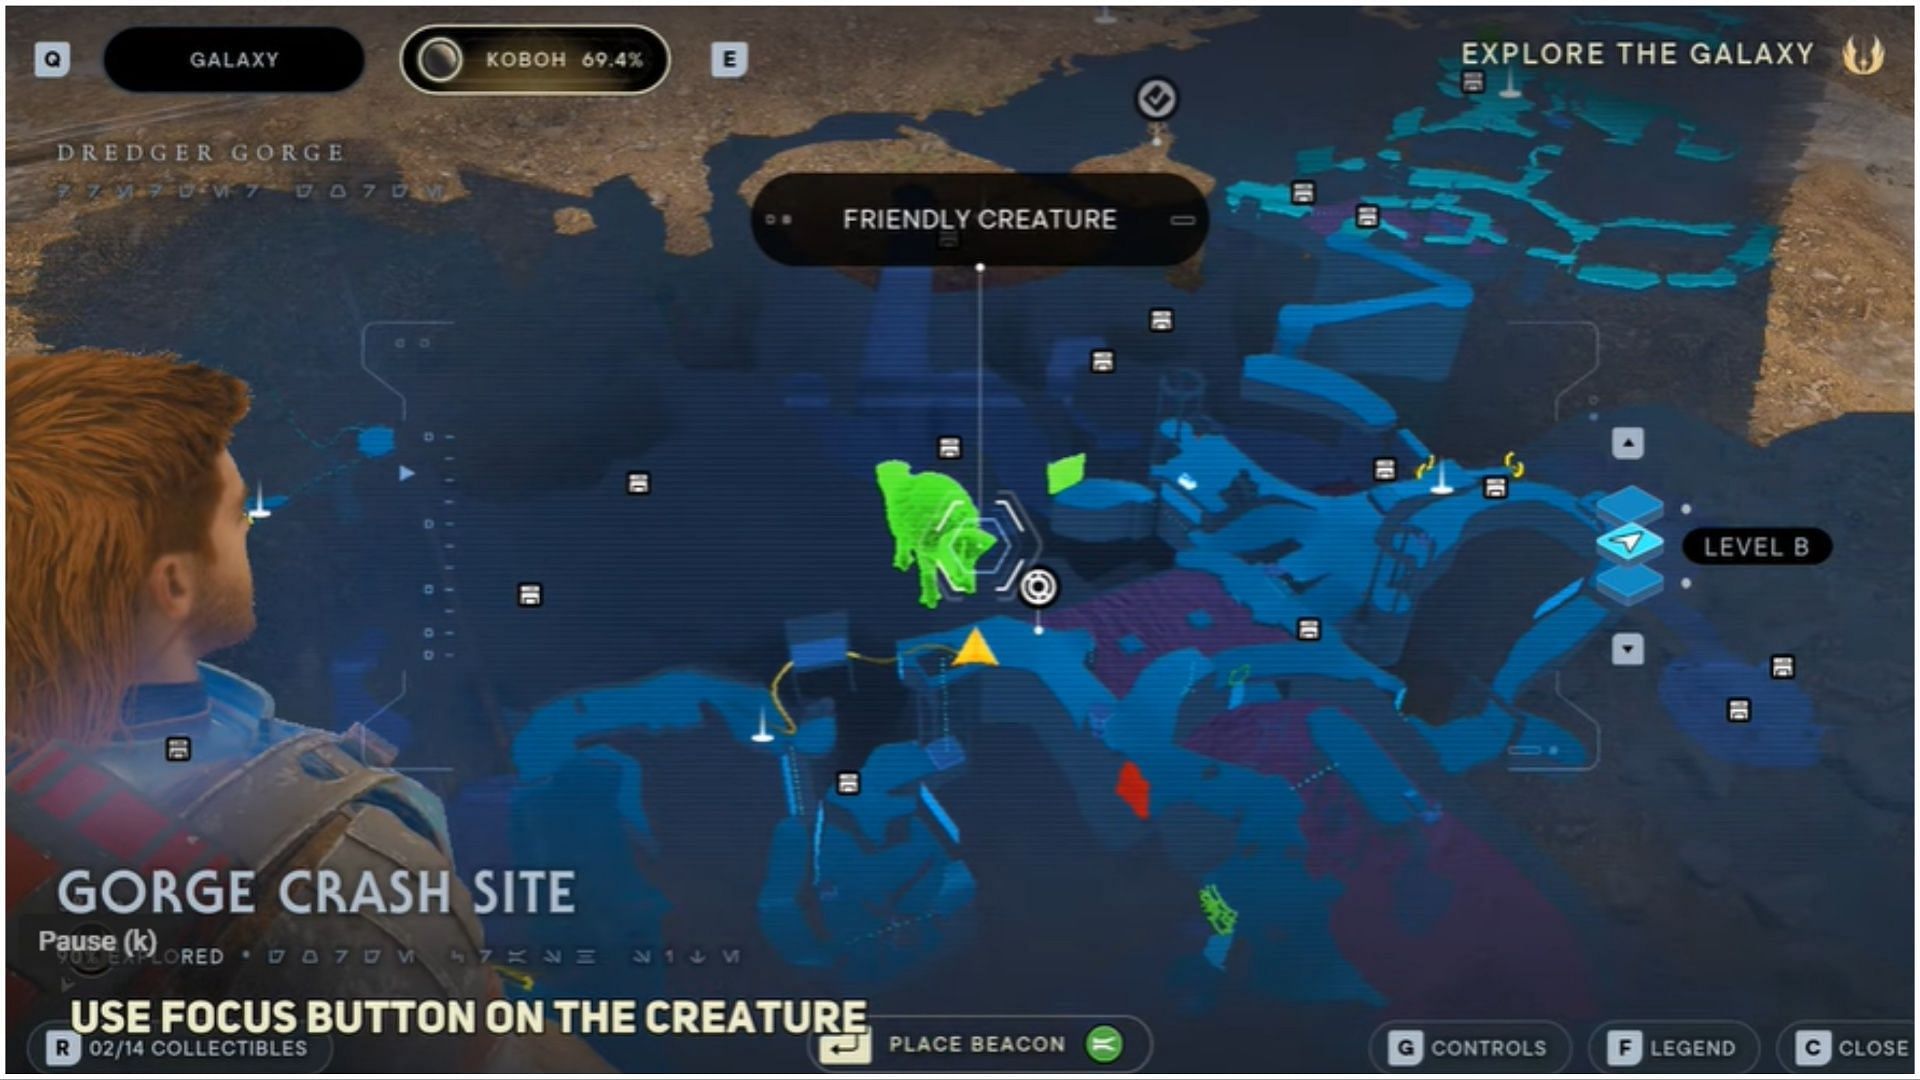 Apply the Focus ability to the Friendly Creature (Image via YouTube/ WoW Quests)